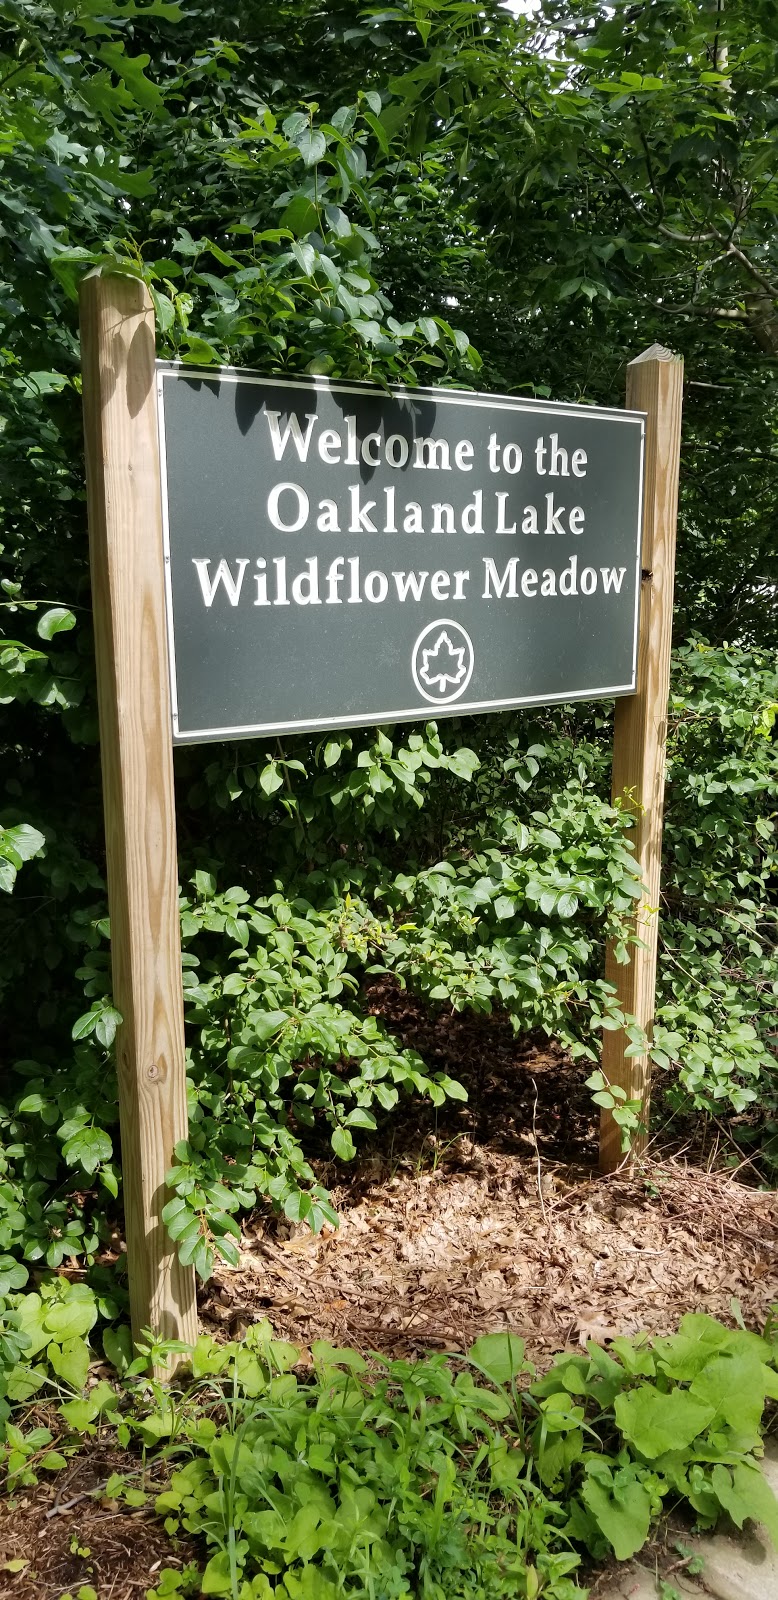 Oakland Lake Wildflower Meadow | 46th Ave &, Cloverdale Blvd, Bayside, NY 11364 | Phone: (212) 639-9675